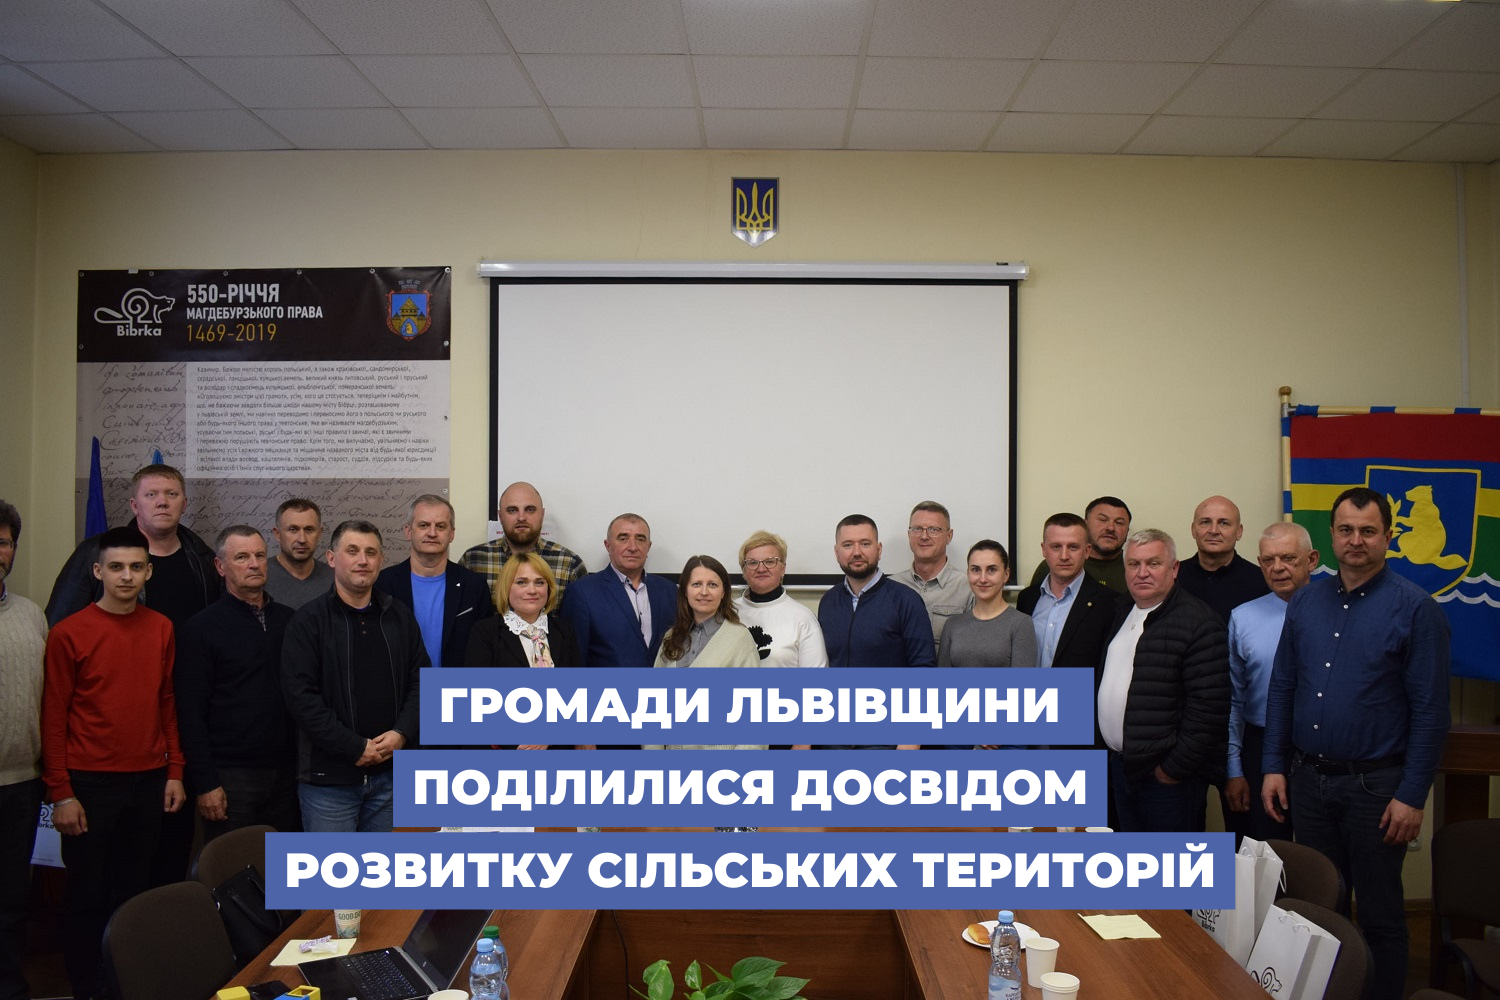 Municipalities of the Lviv Oblast shared their experience of developing rural areas